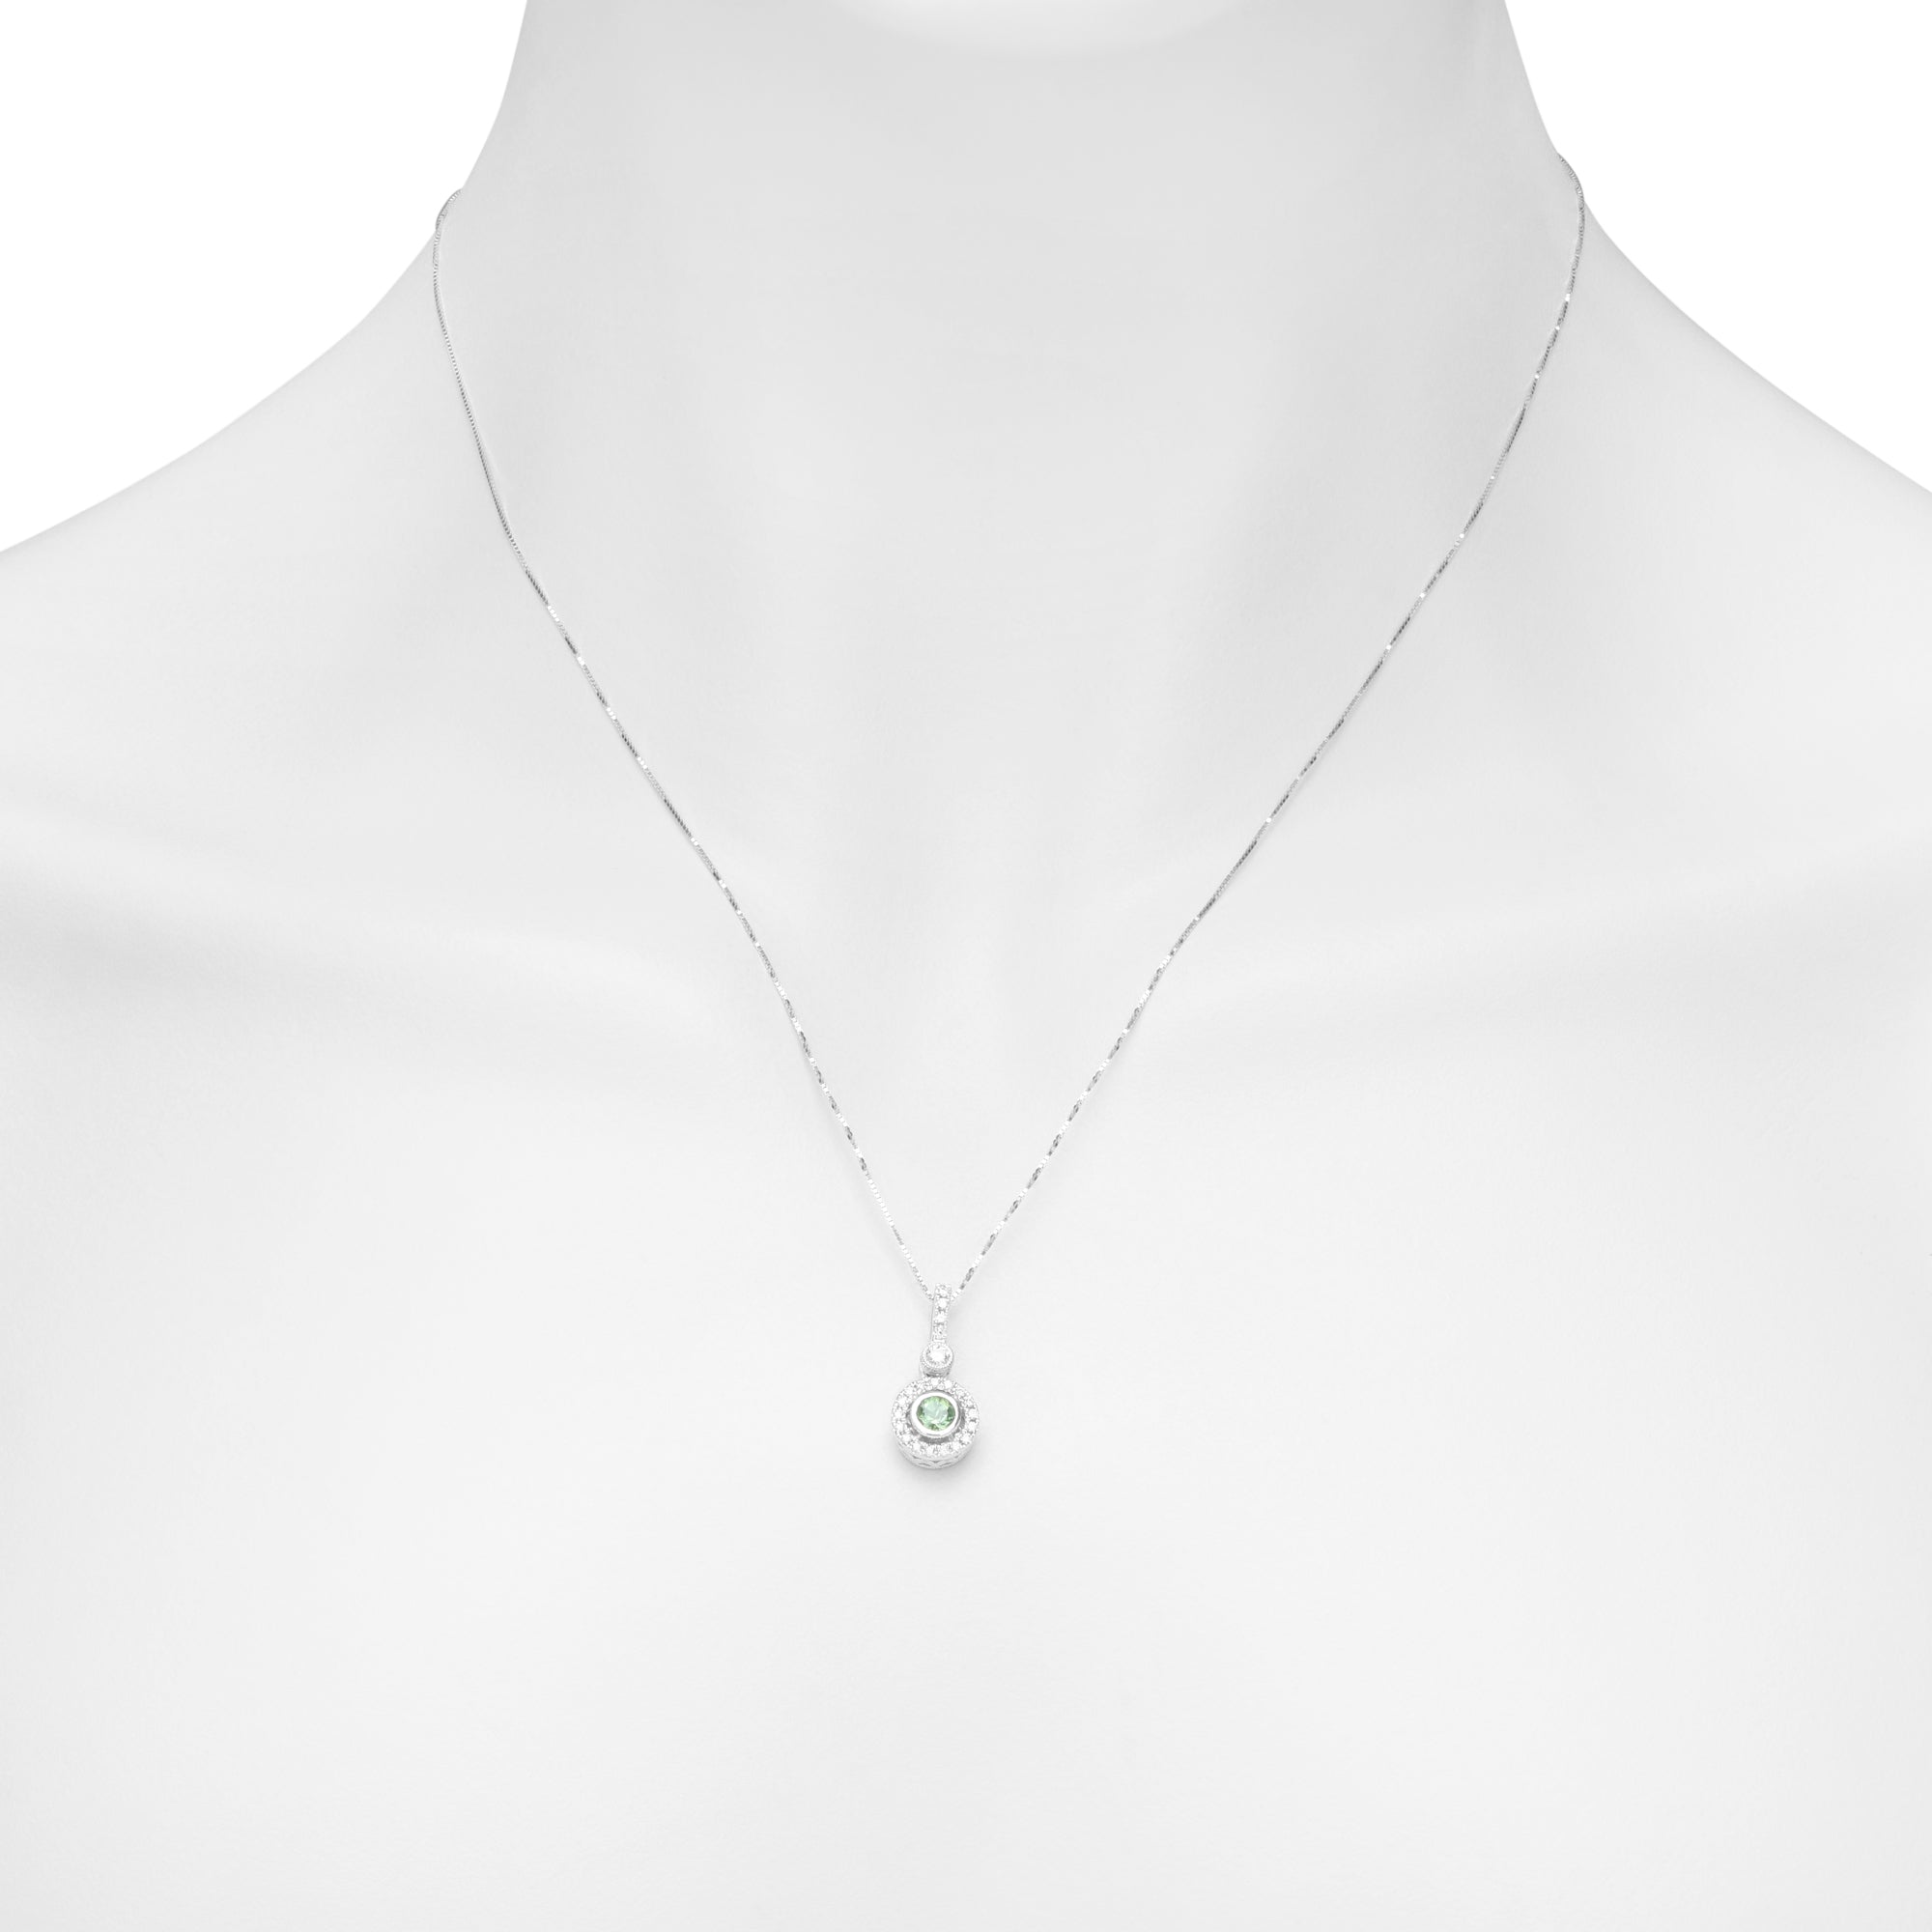 Maine Green Tourmaline Bezel Necklace in 14kt White Gold with Diamonds (1/5ct tw)